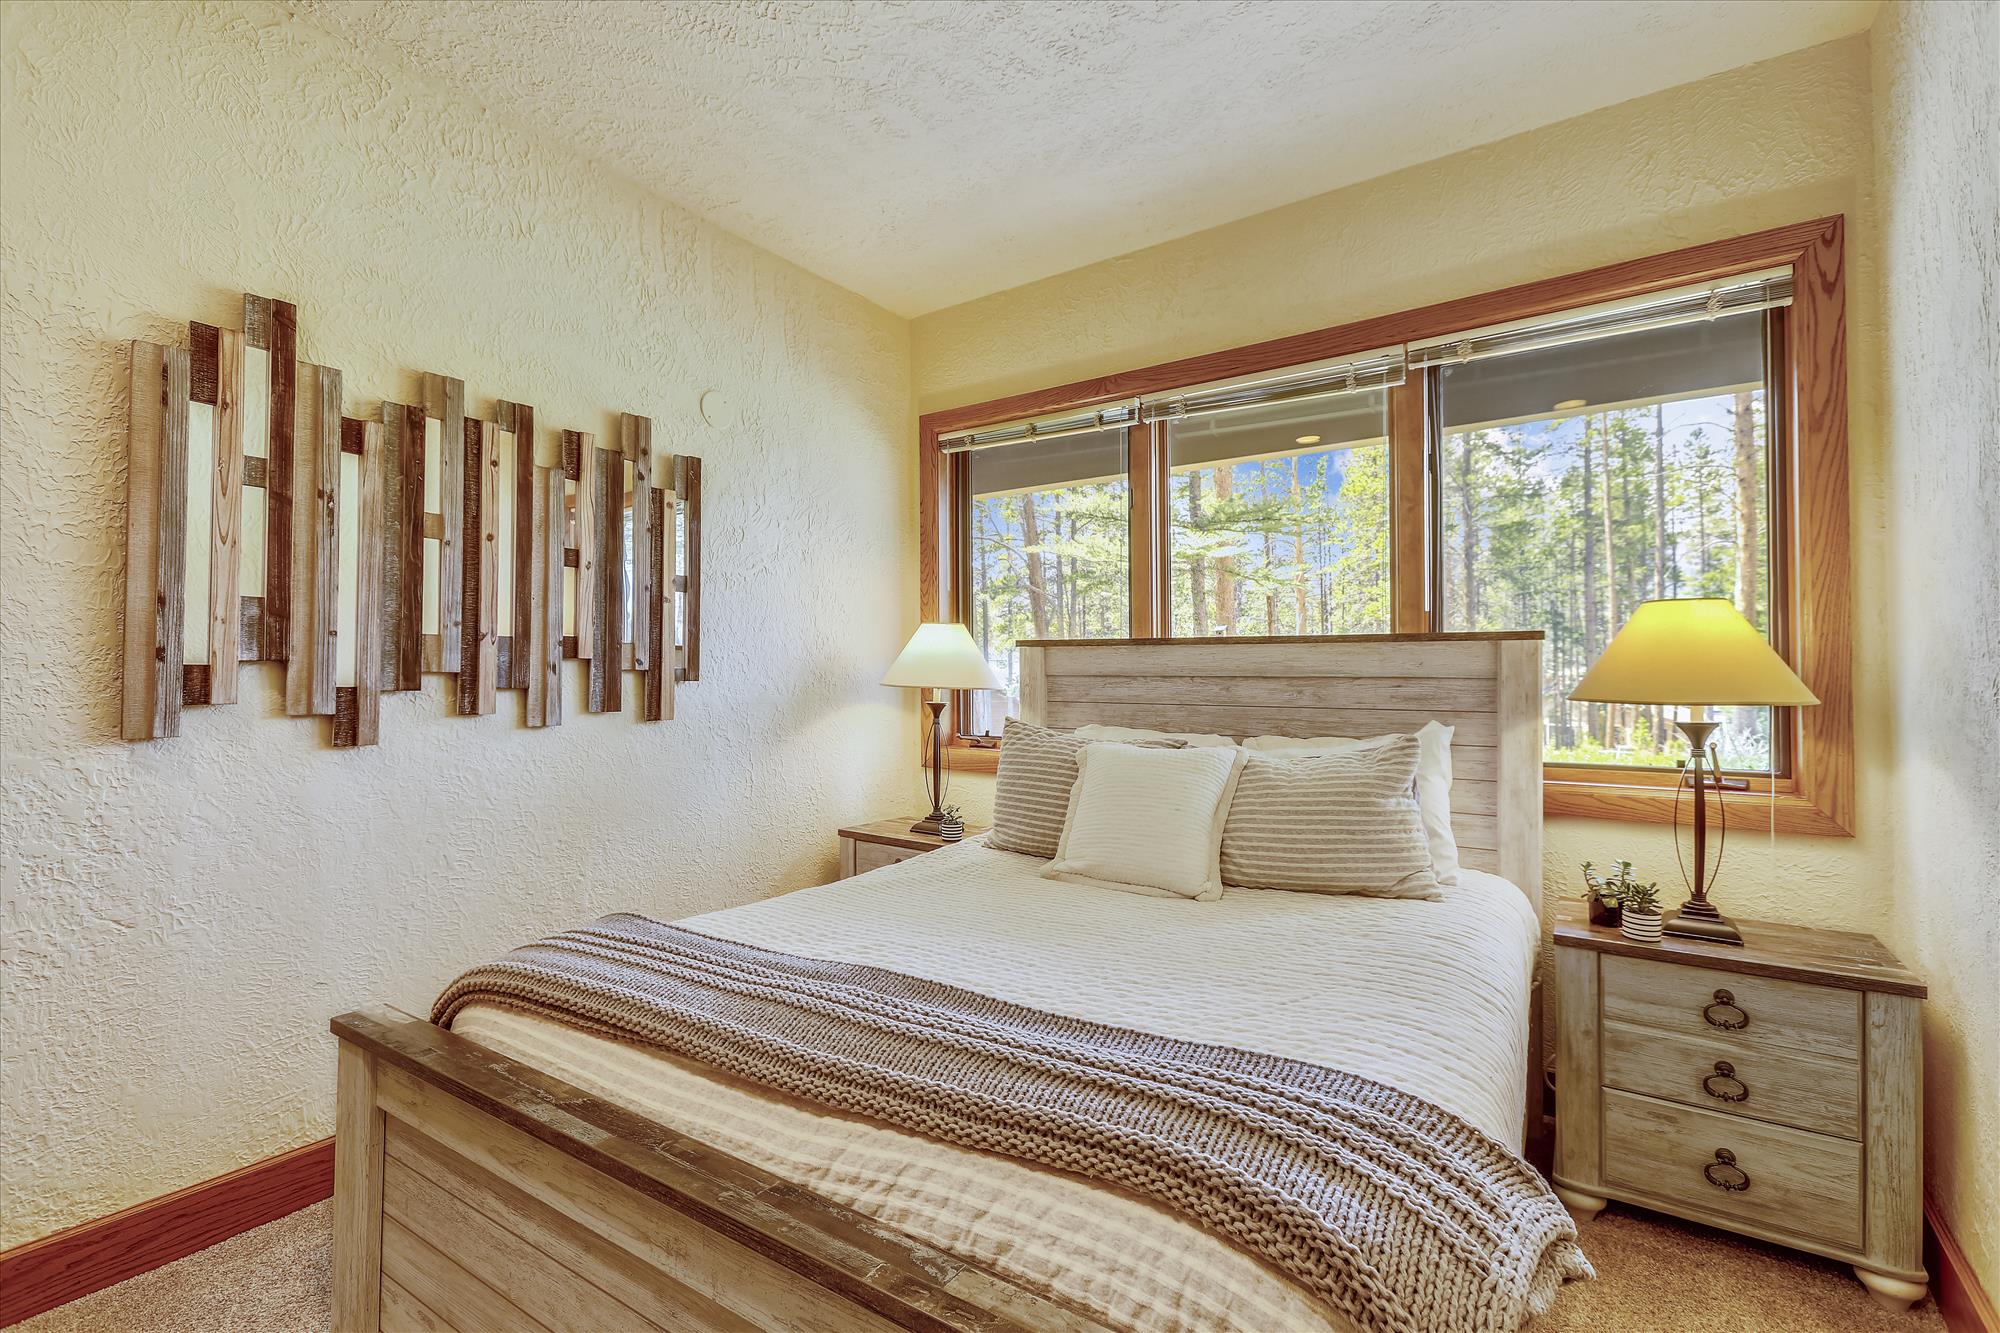 Wind down and relax in this cozy queen bedroom - Evergreen Lodge Breckenridge Vacation Rental